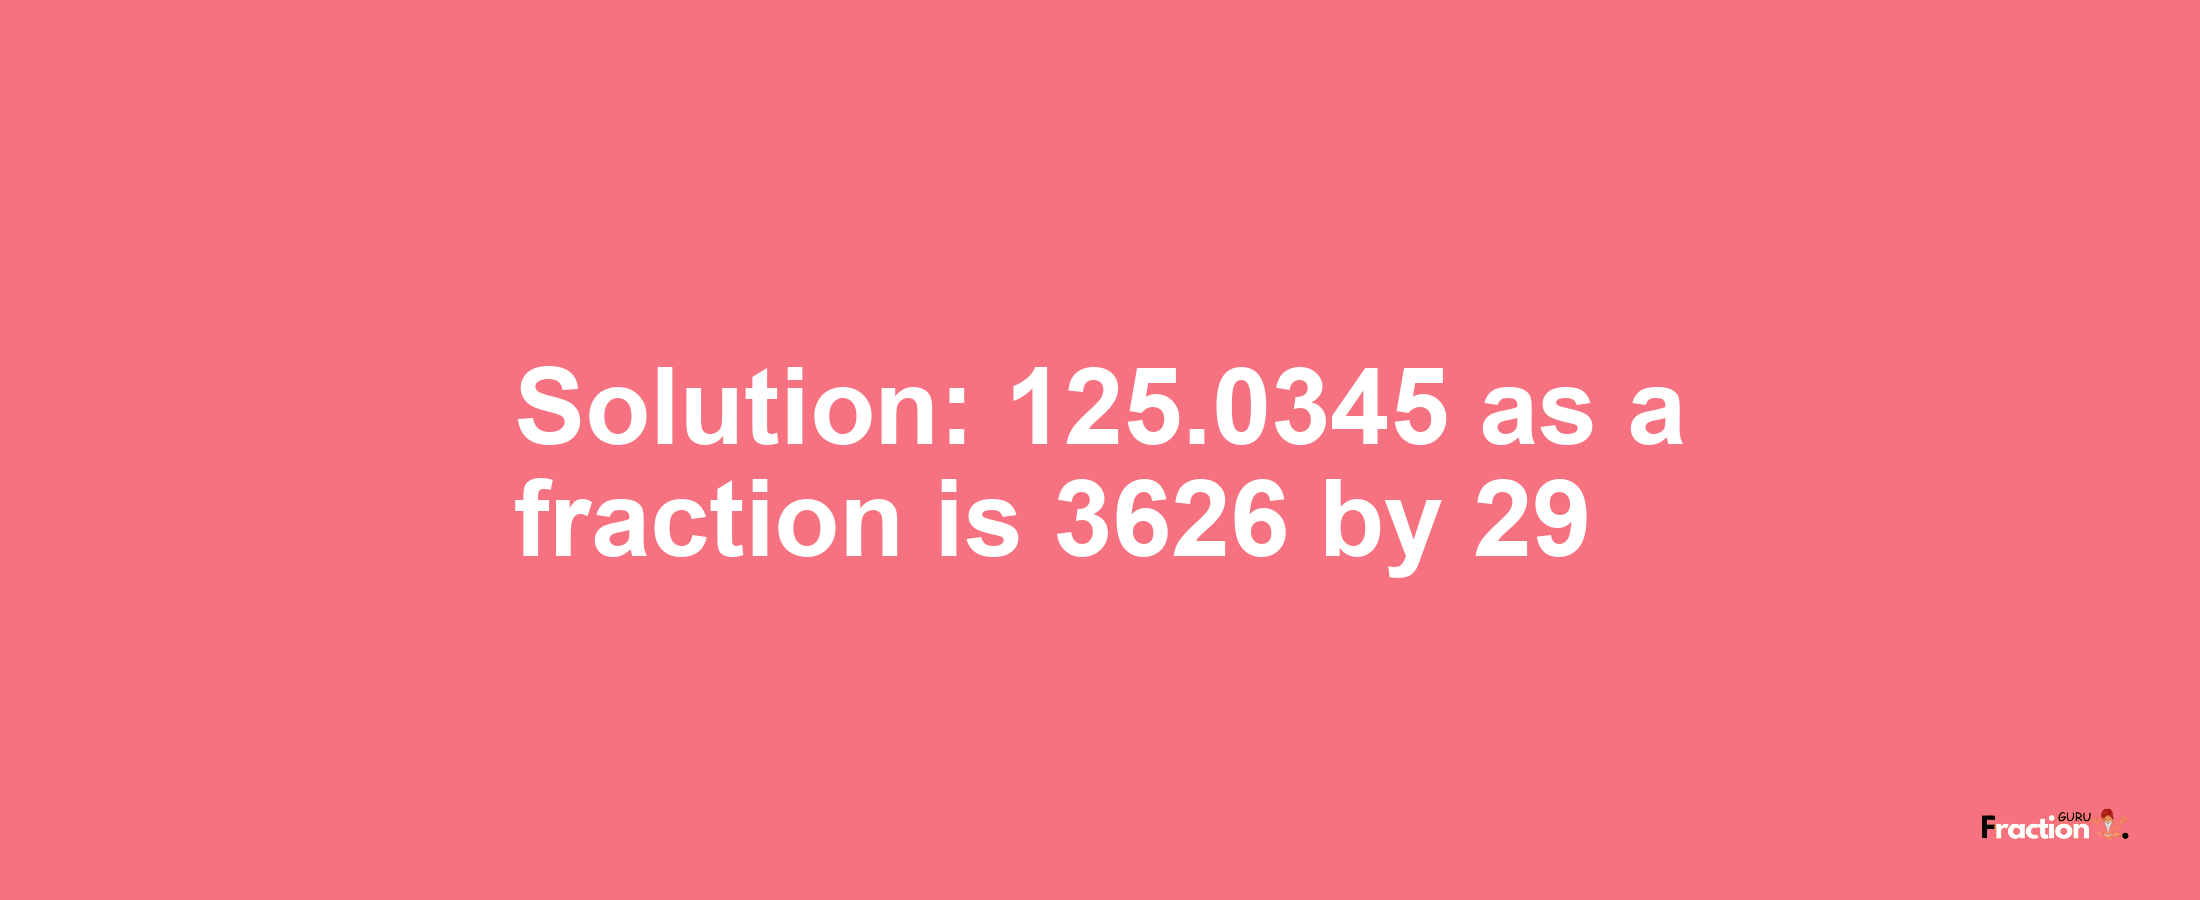 Solution:125.0345 as a fraction is 3626/29